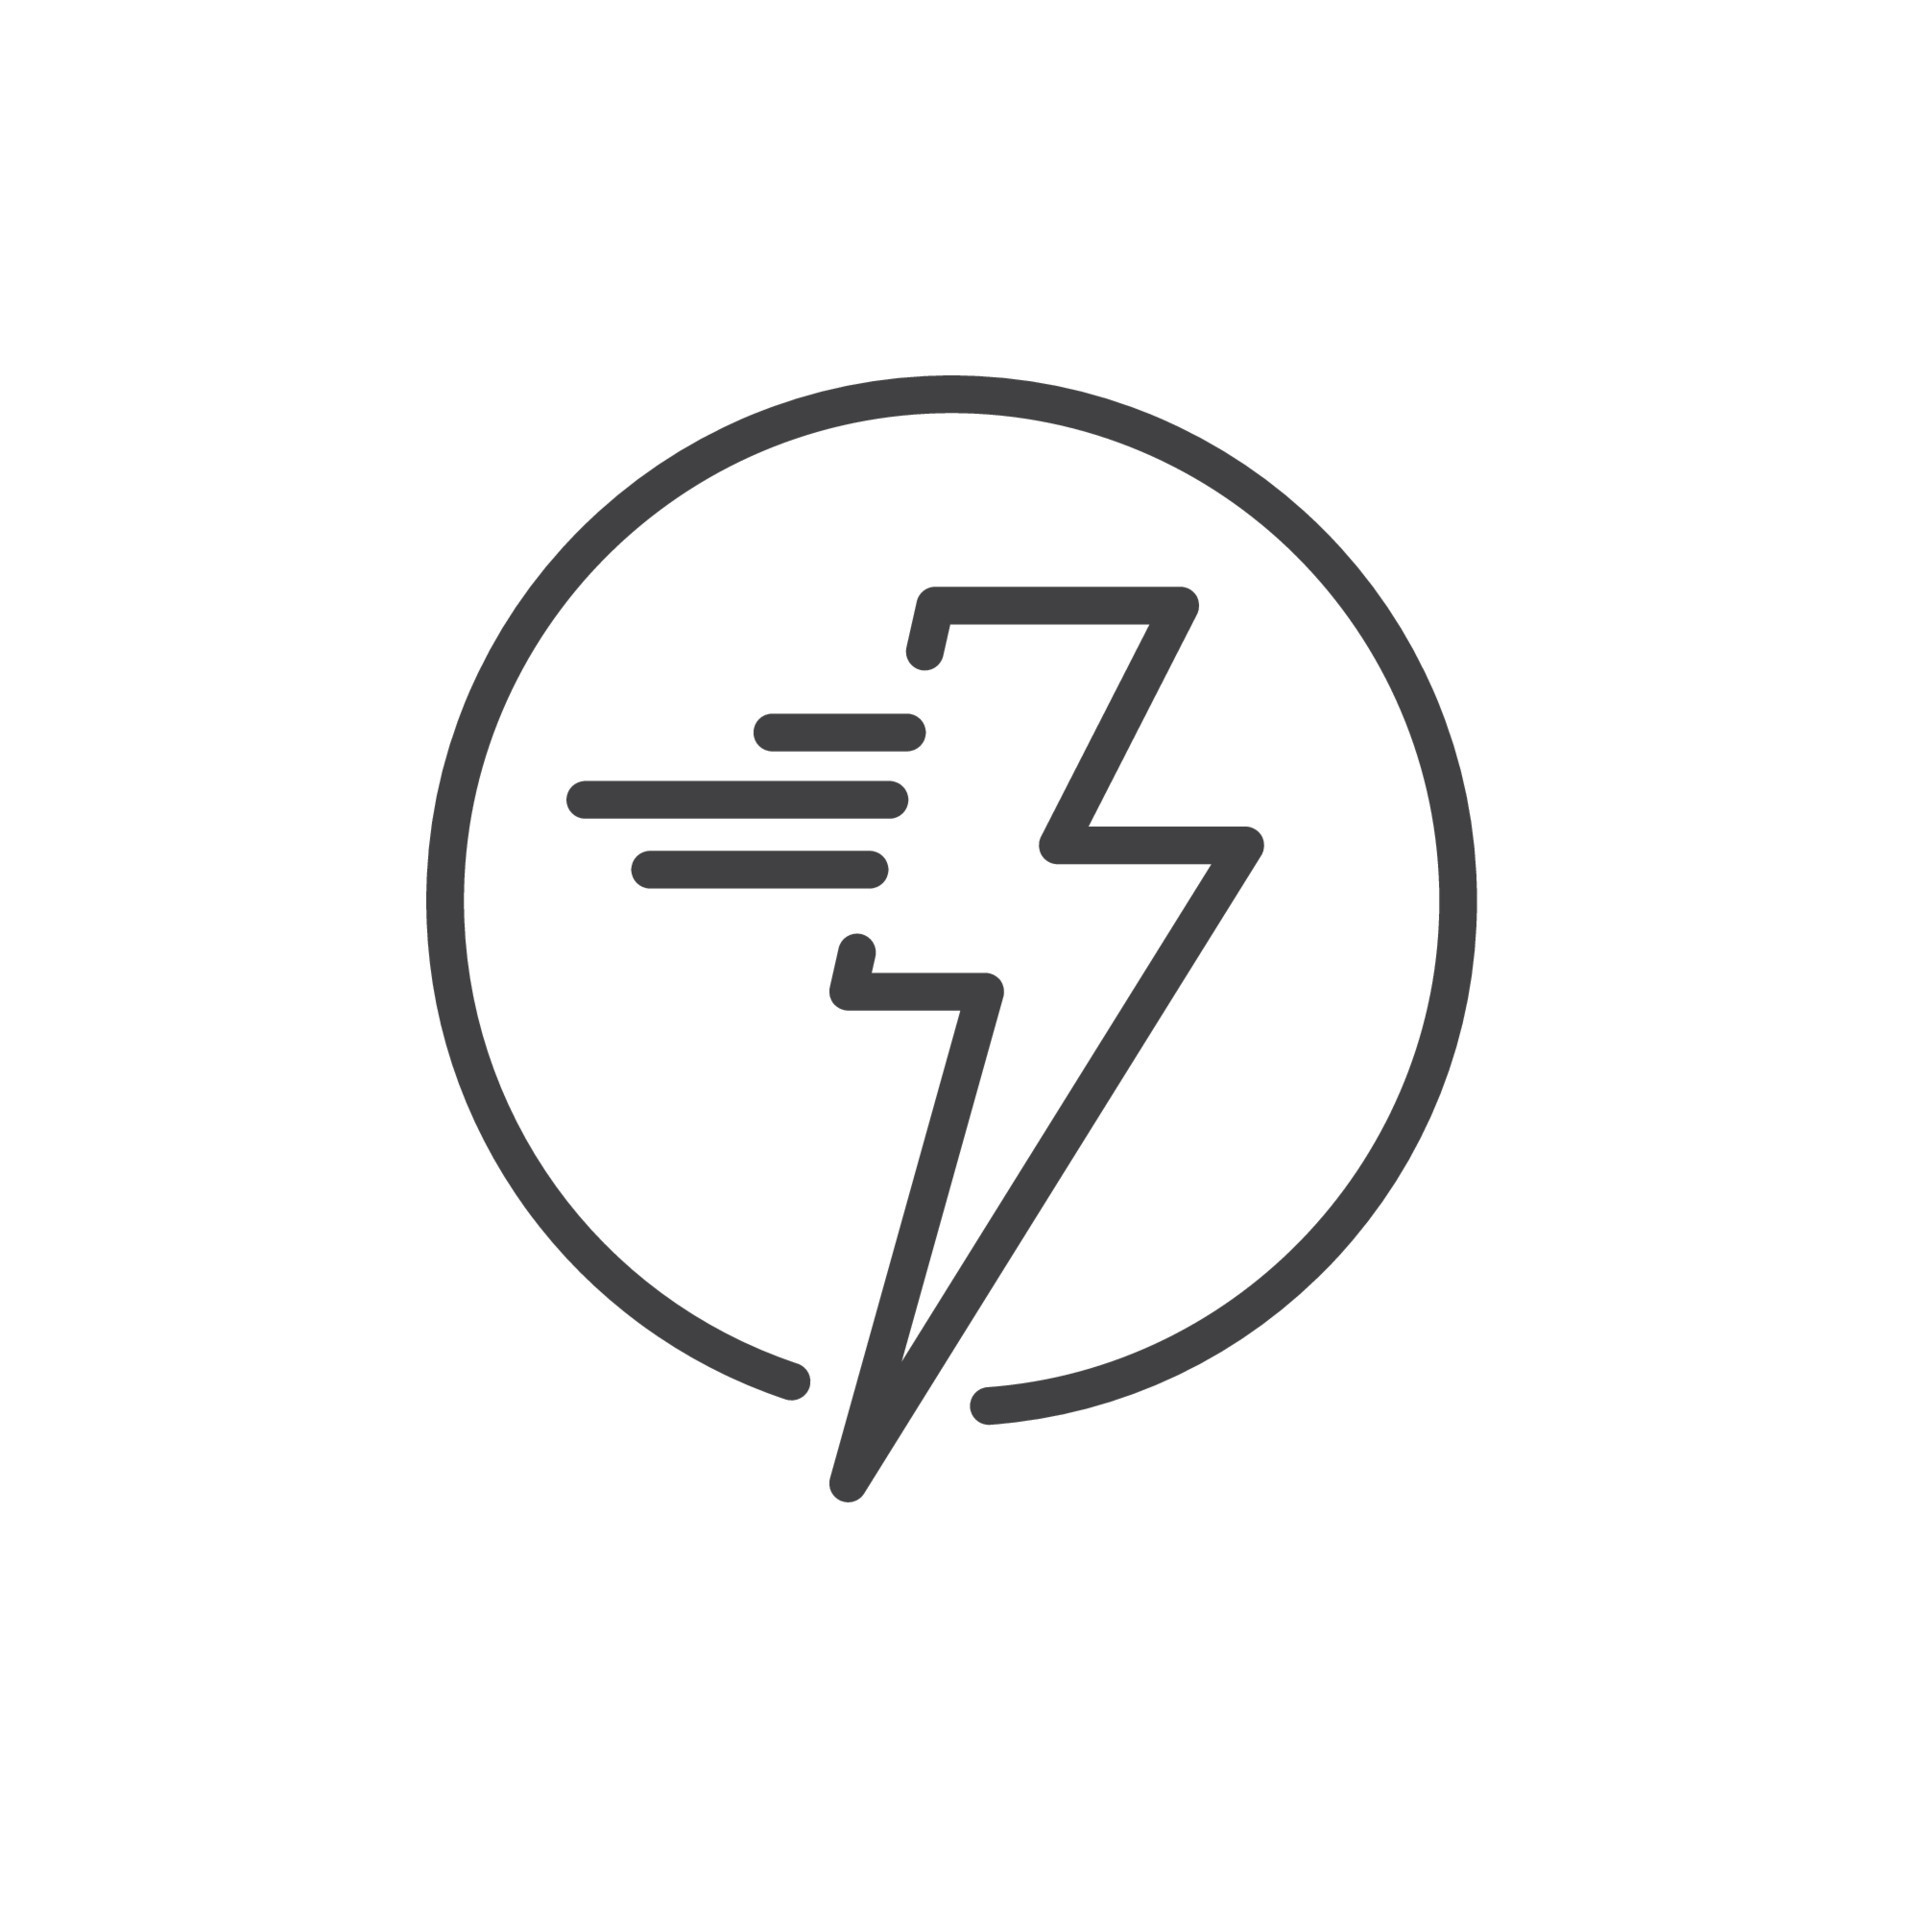 https://static.vecteezy.com/system/resources/previews/021/745/423/original/fast-charging-icon-element-design-template-vector.jpg